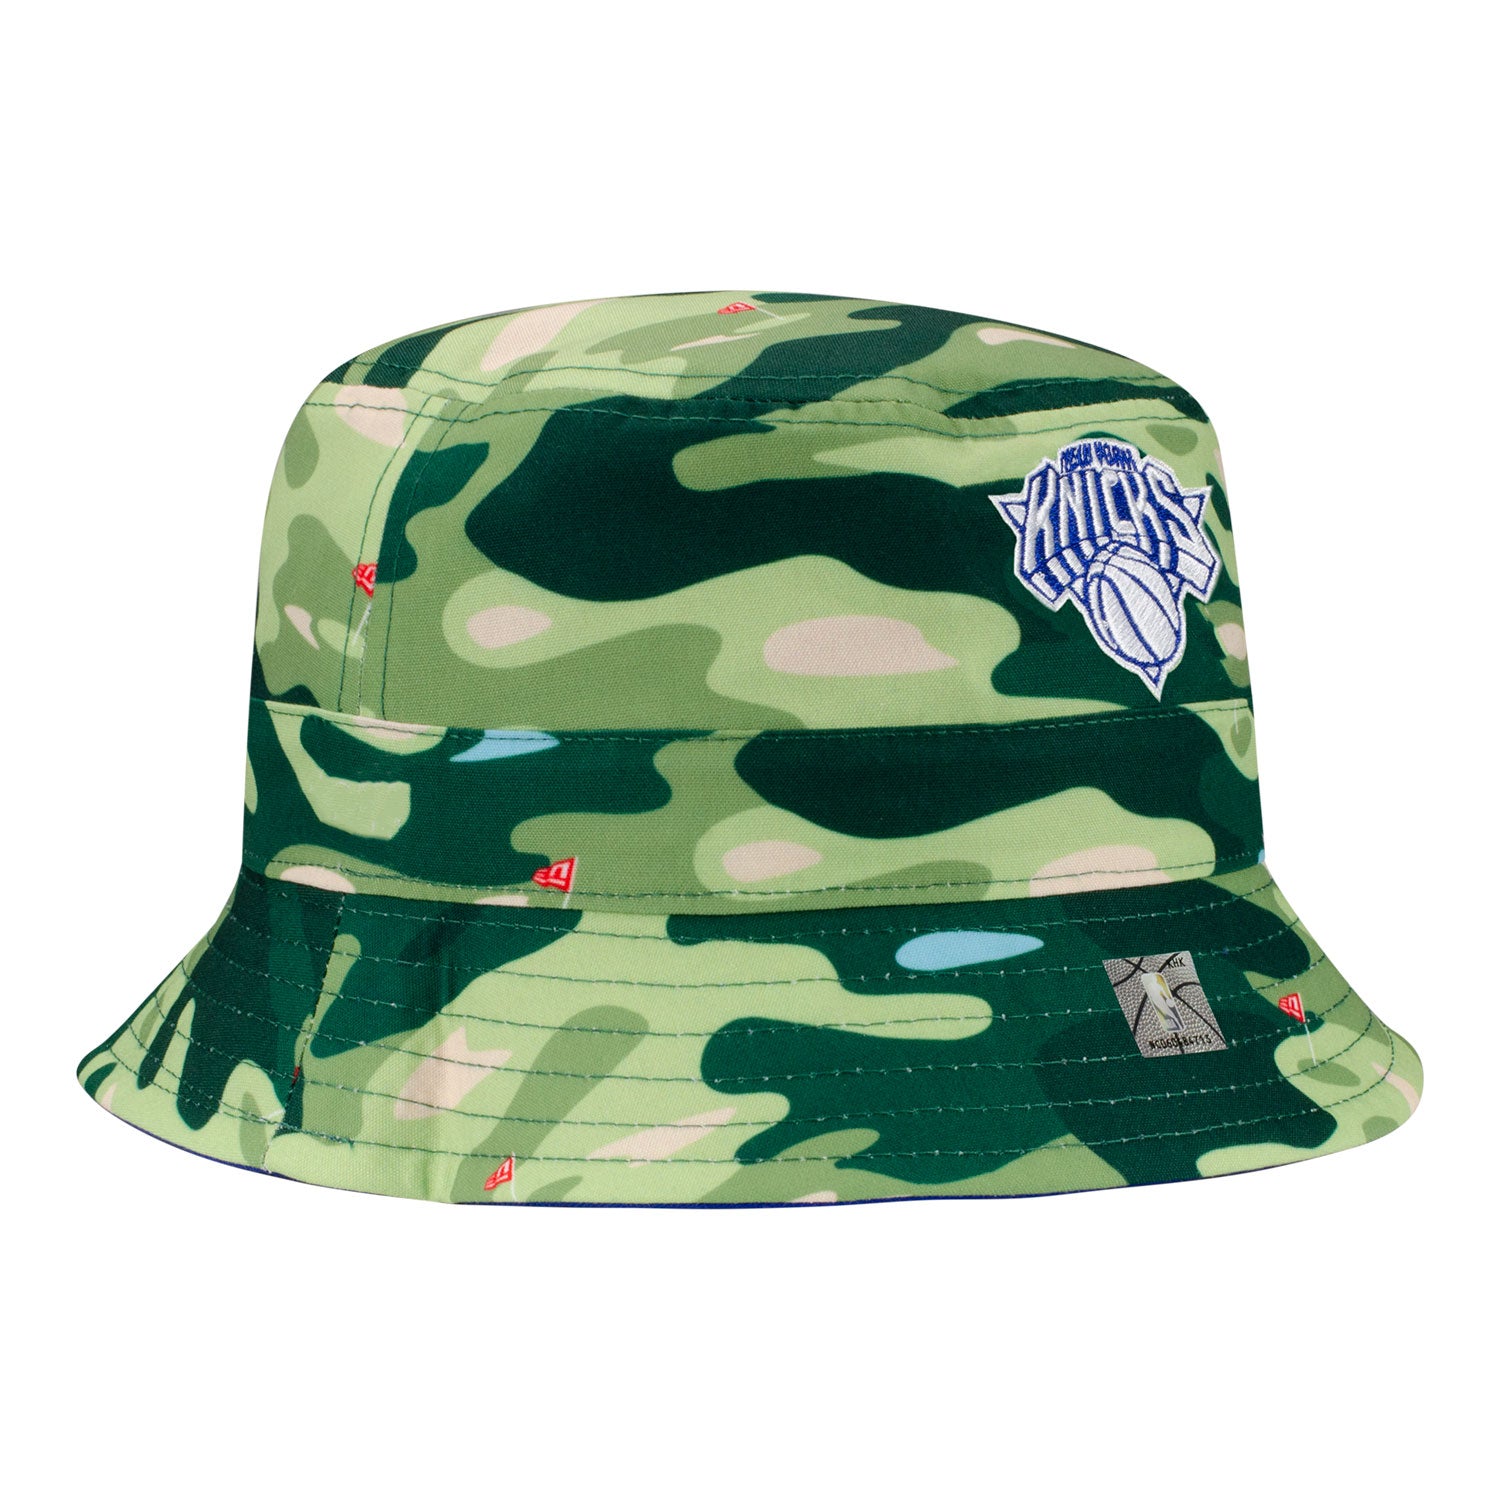 New Era Knicks Golf Print Reversible Bucket Hat - In Green - Reversible Angled Right View